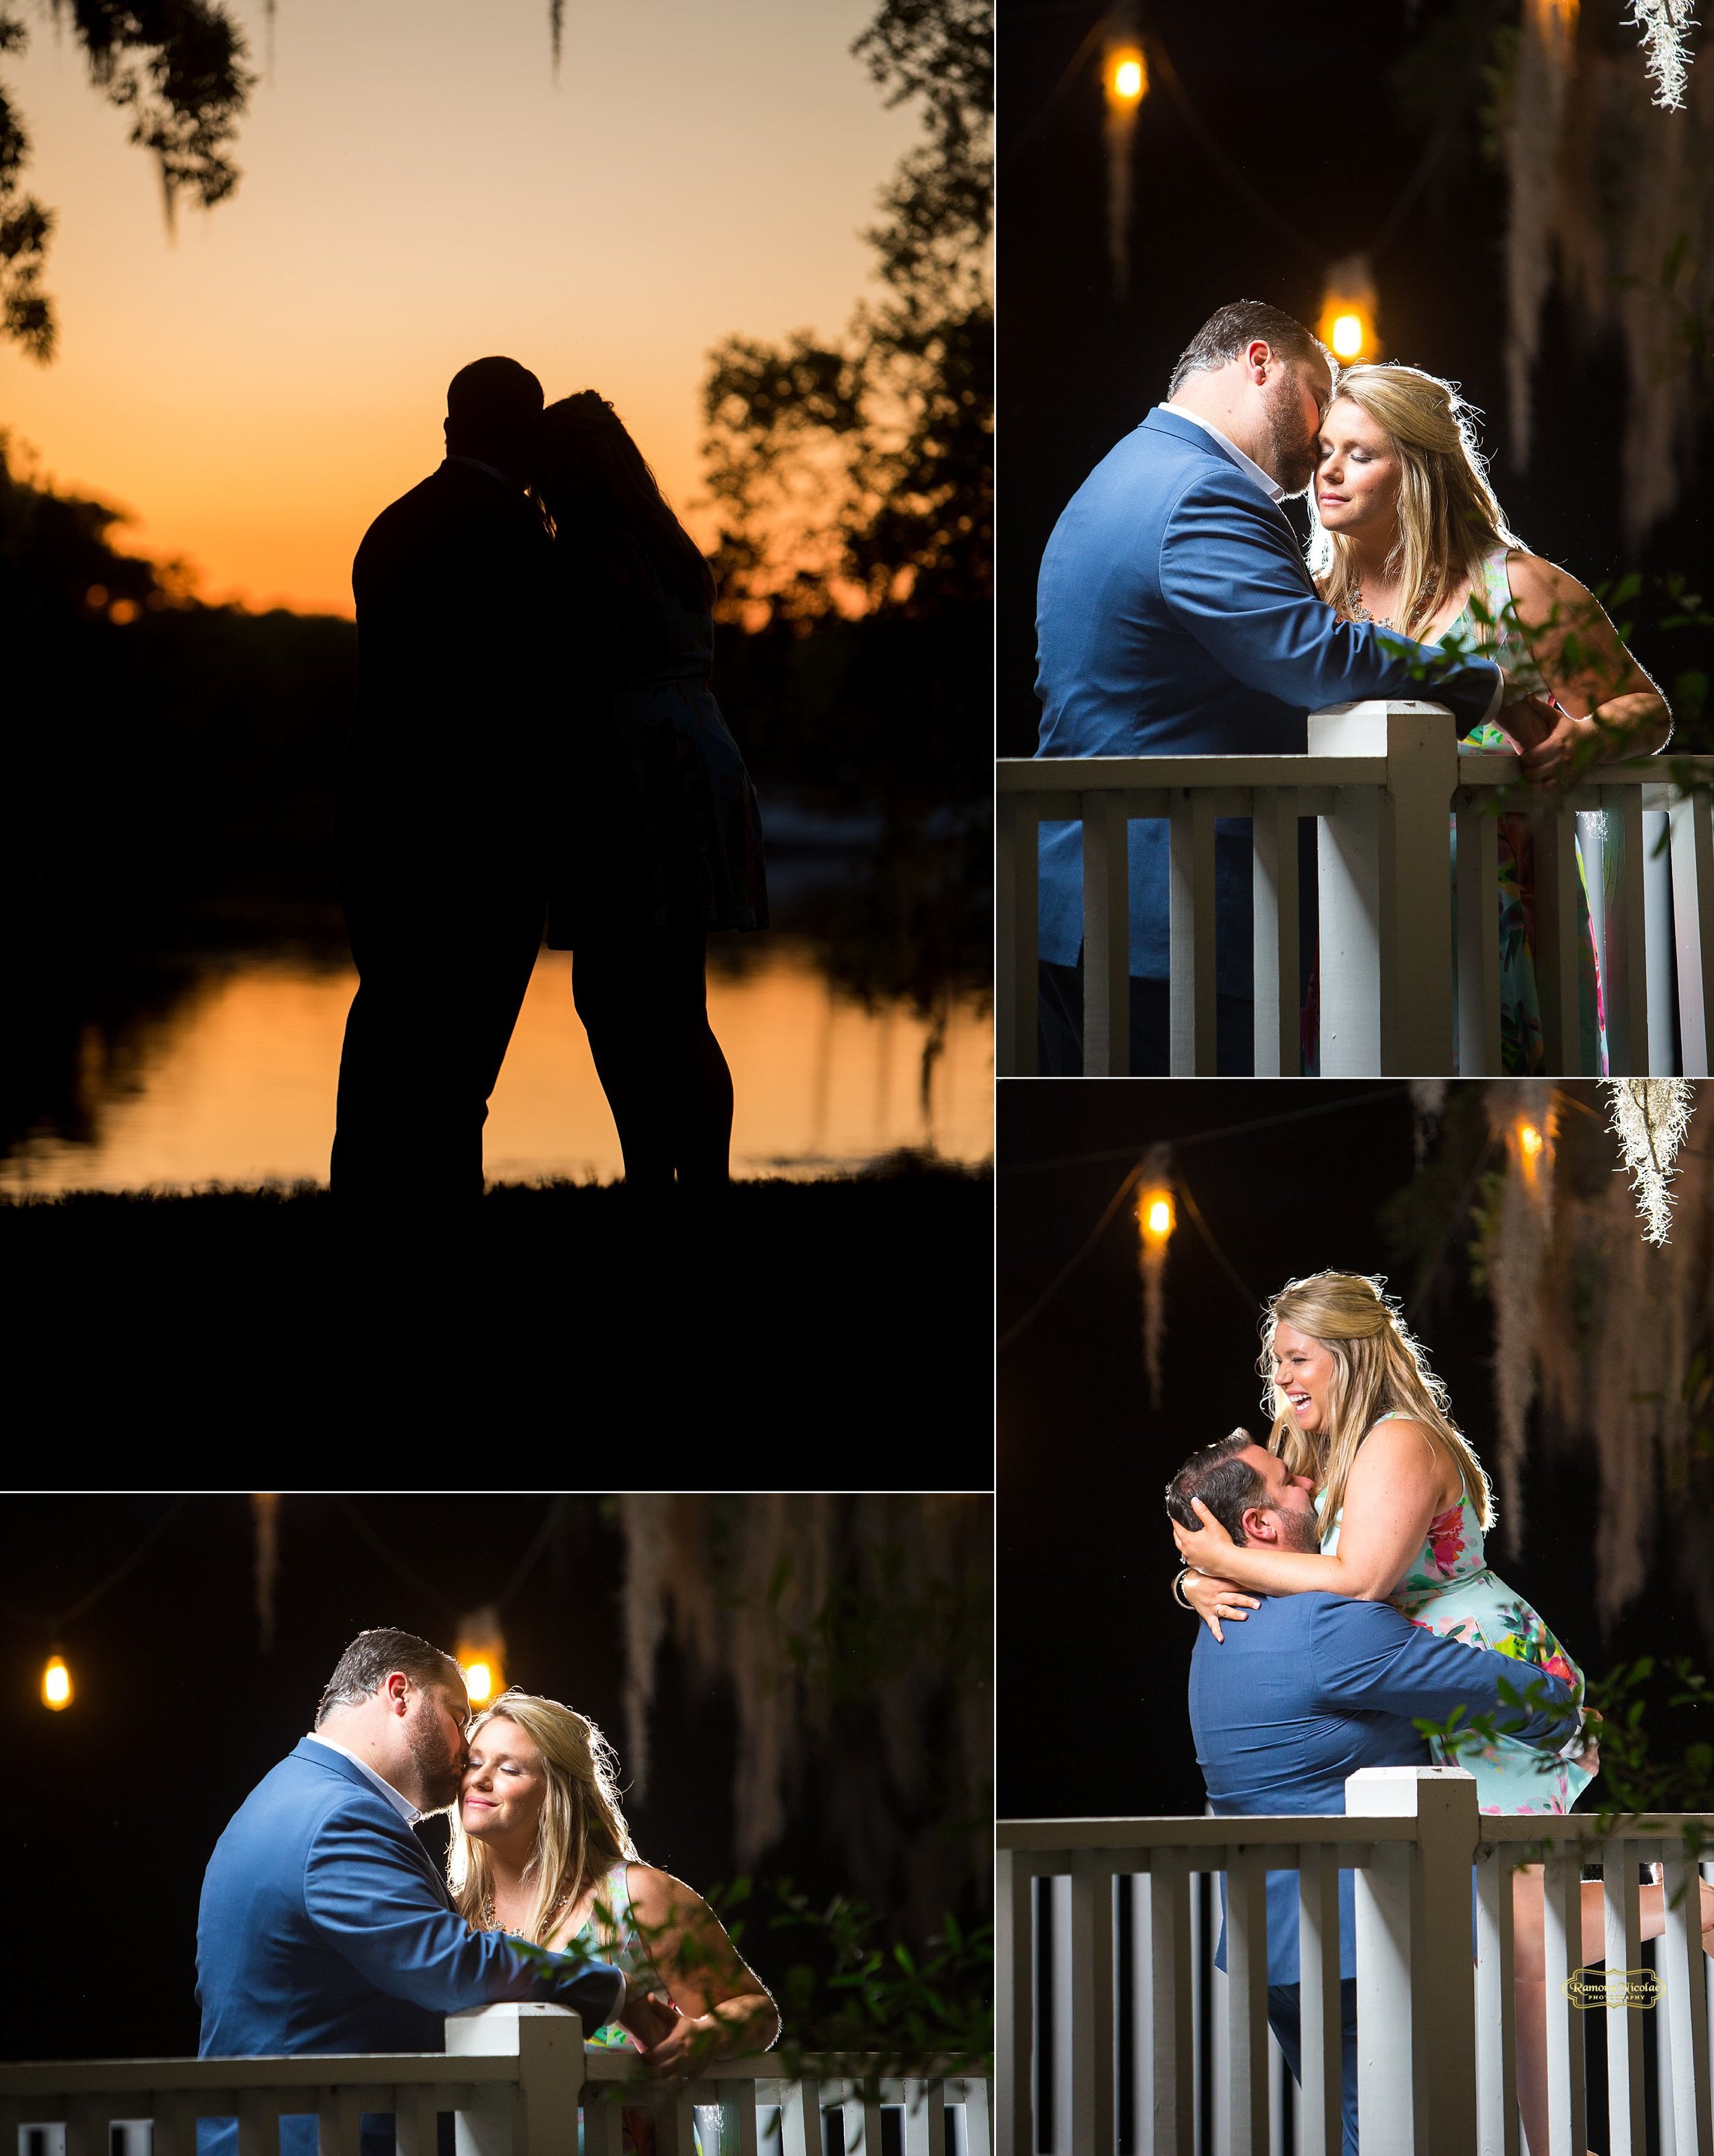 silhouette and night time engagement photos at wachesaw plantation.jpg